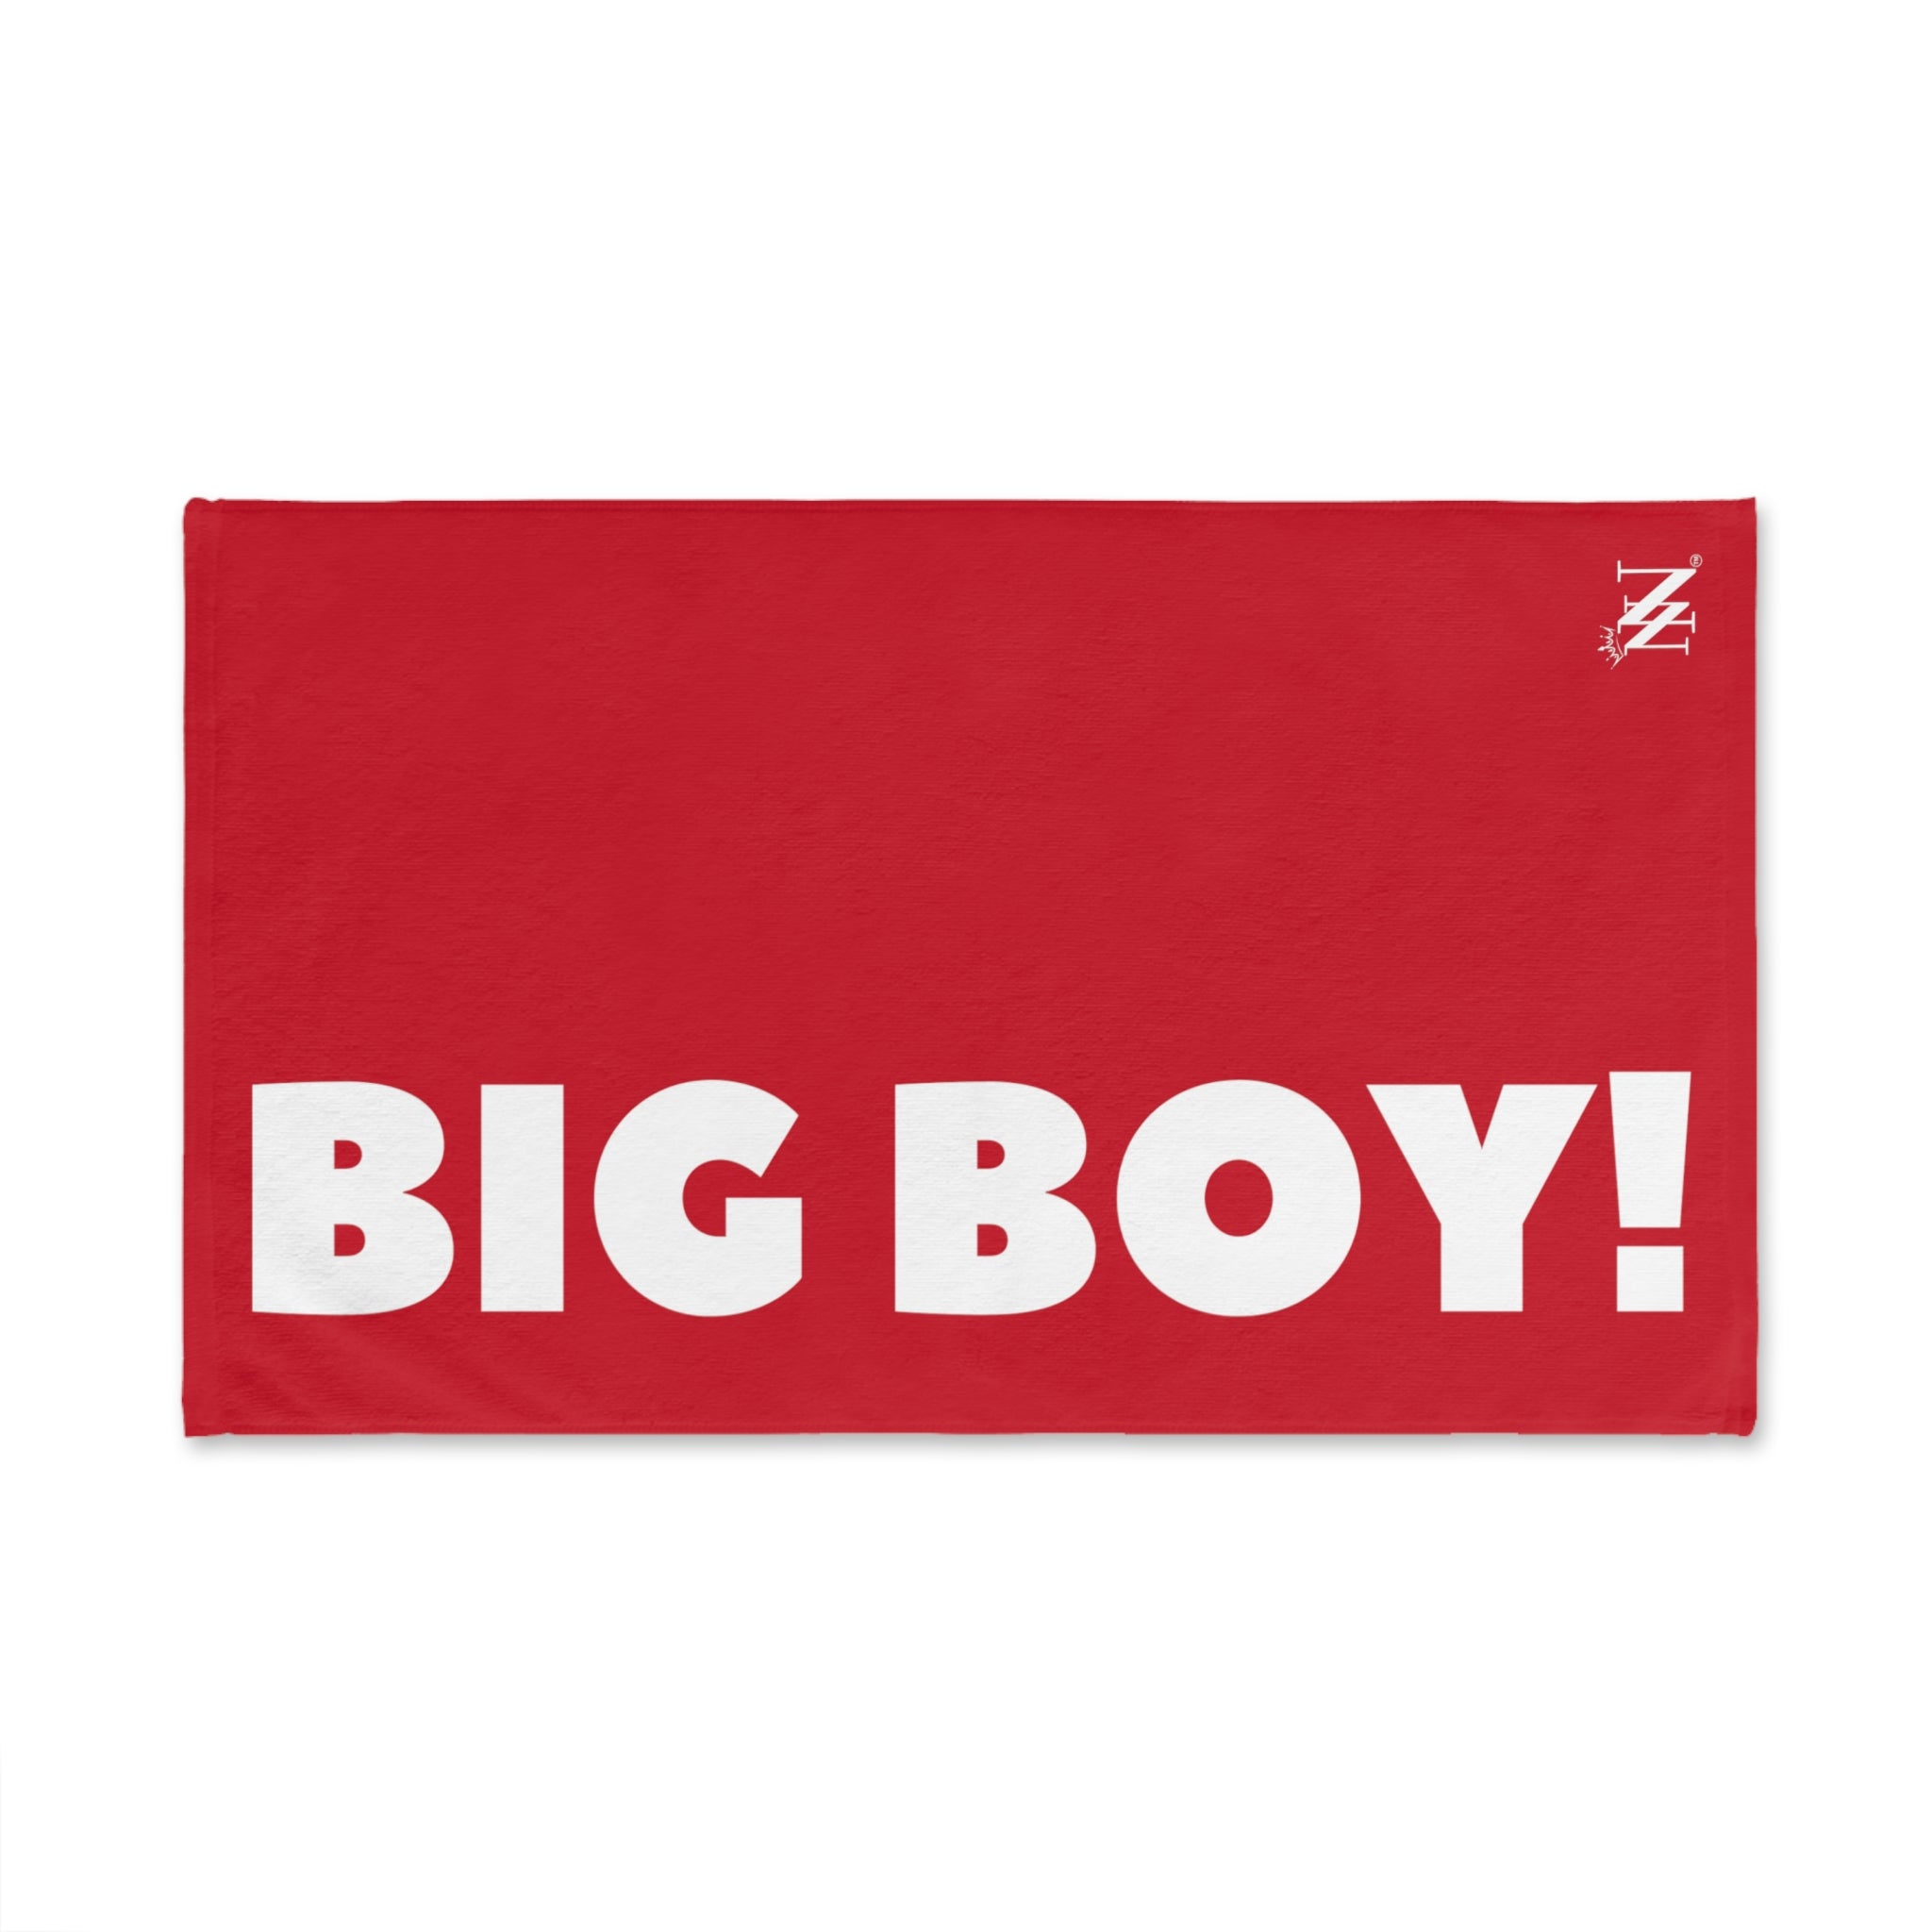 Big Boy Man Red | Sexy Gifts for Boyfriend, Funny Towel Romantic Gift for Wedding Couple Fiance First Year 2nd Anniversary Valentines, Party Gag Gifts, Joke Humor Cloth for Husband Men BF NECTAR NAPKINS